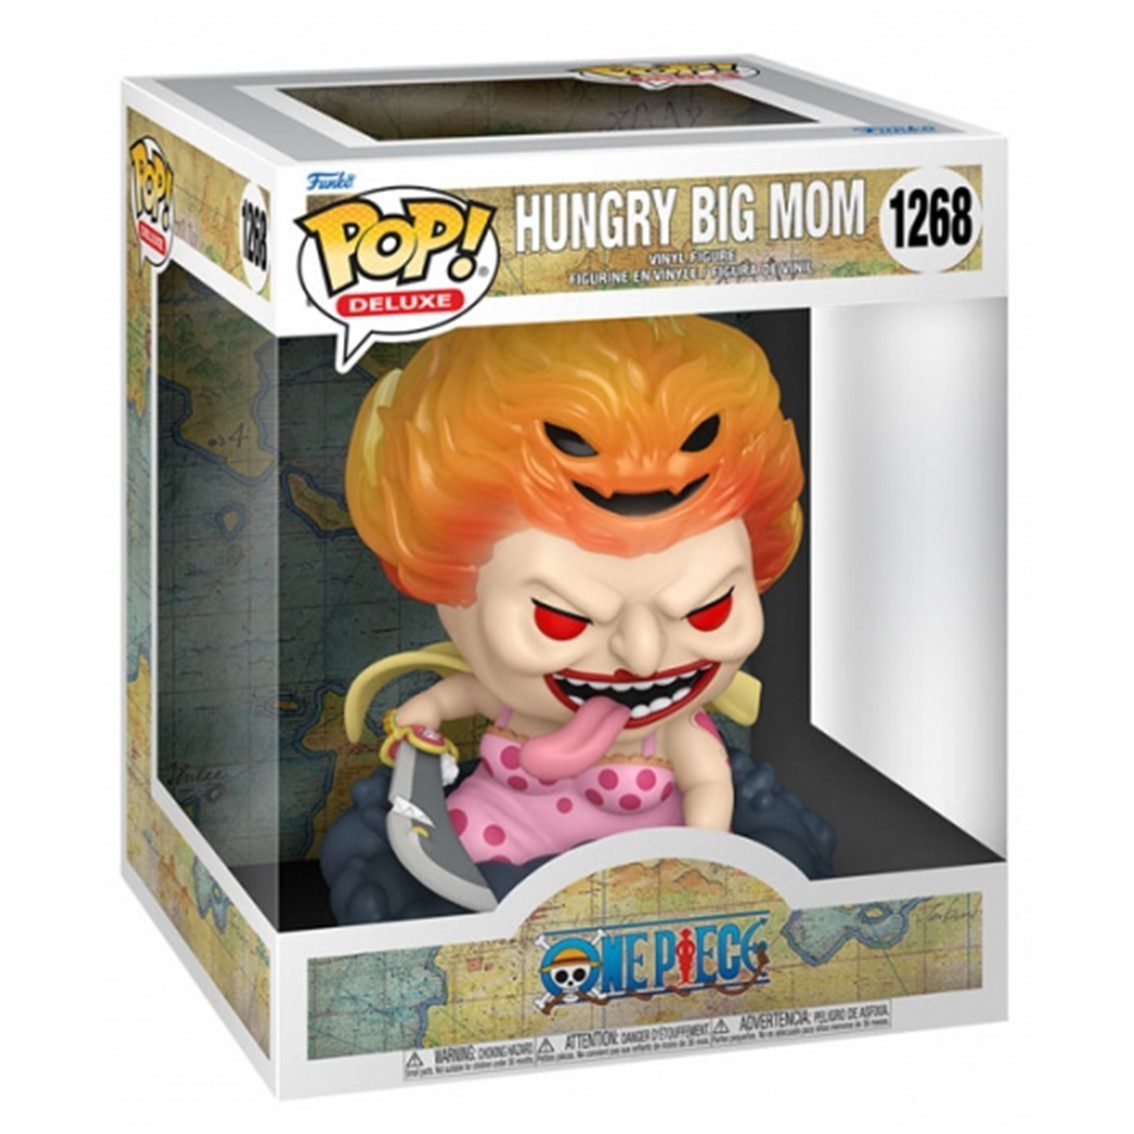 889698613699-PN-61369-Cod.-Articulo-MGS0000015008-Funko-pop-one-piece-hungry-big-mom-deluxe-61369-1